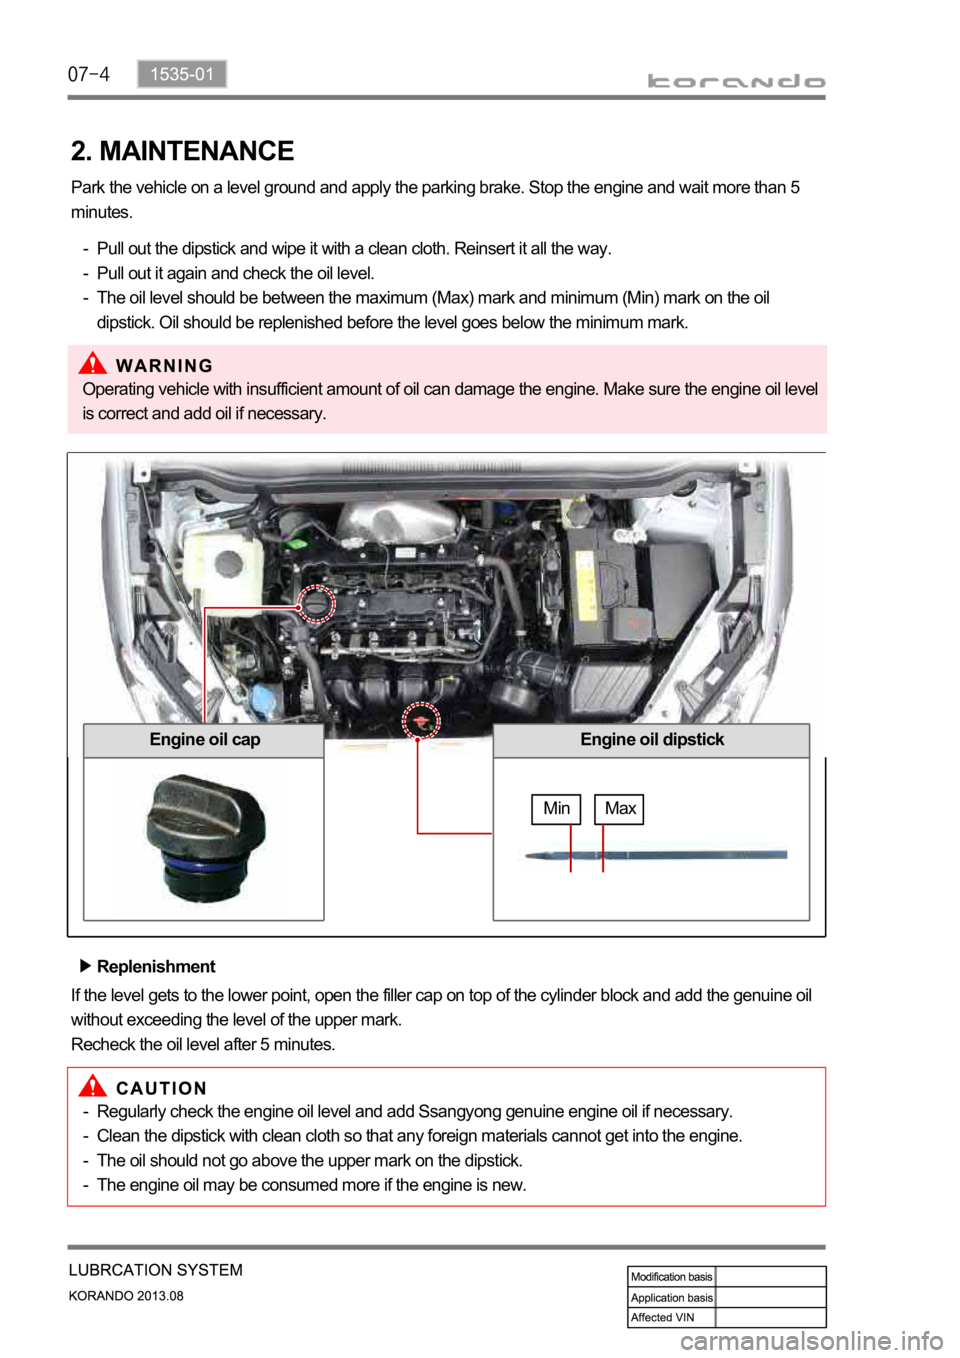 SSANGYONG KORANDO 2013  Service Manual 2. MAINTENANCE
Park the vehicle on a level ground and apply the parking brake. Stop the engine and wait more than 5 
minutes.
Pull out the dipstick and wipe it with a clean cloth. Reinsert it all the 